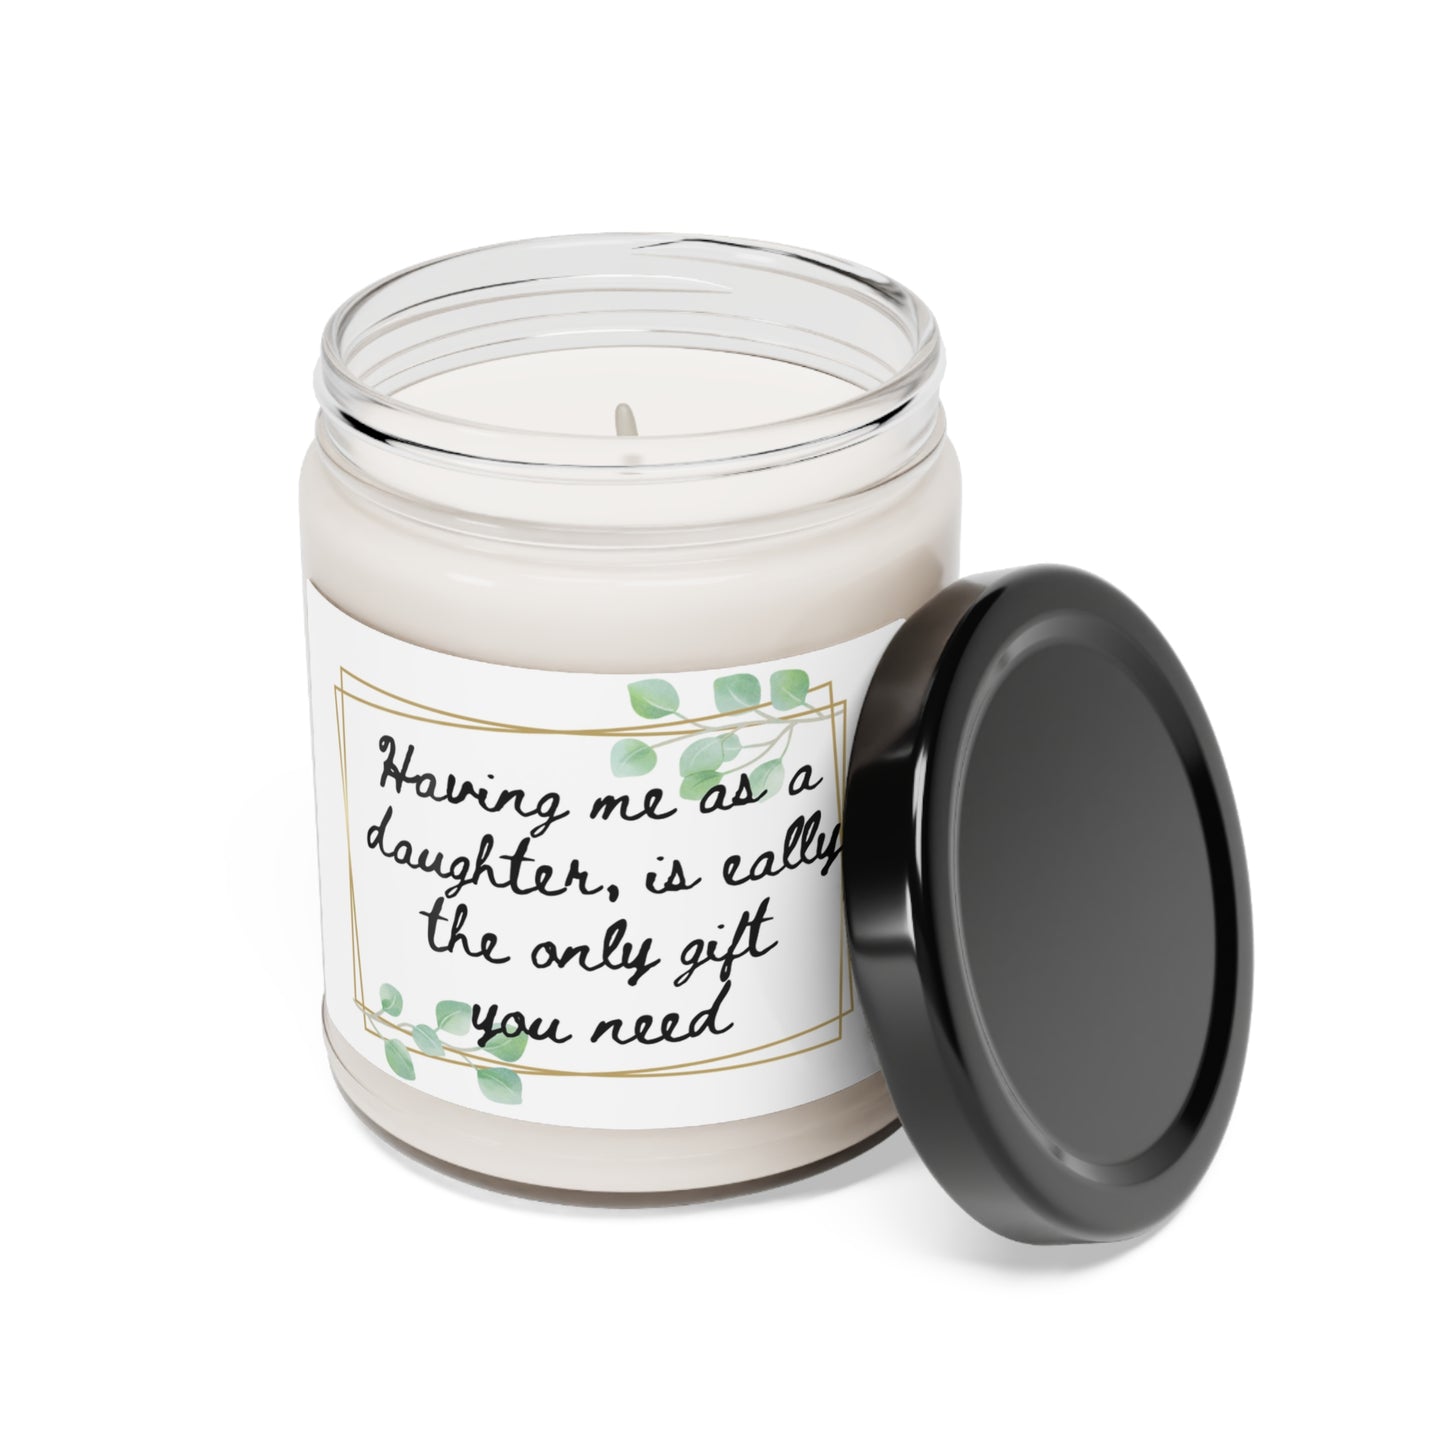 Scented Soy Candle, 9oz. Having me as a daughter, is really the only gift you need